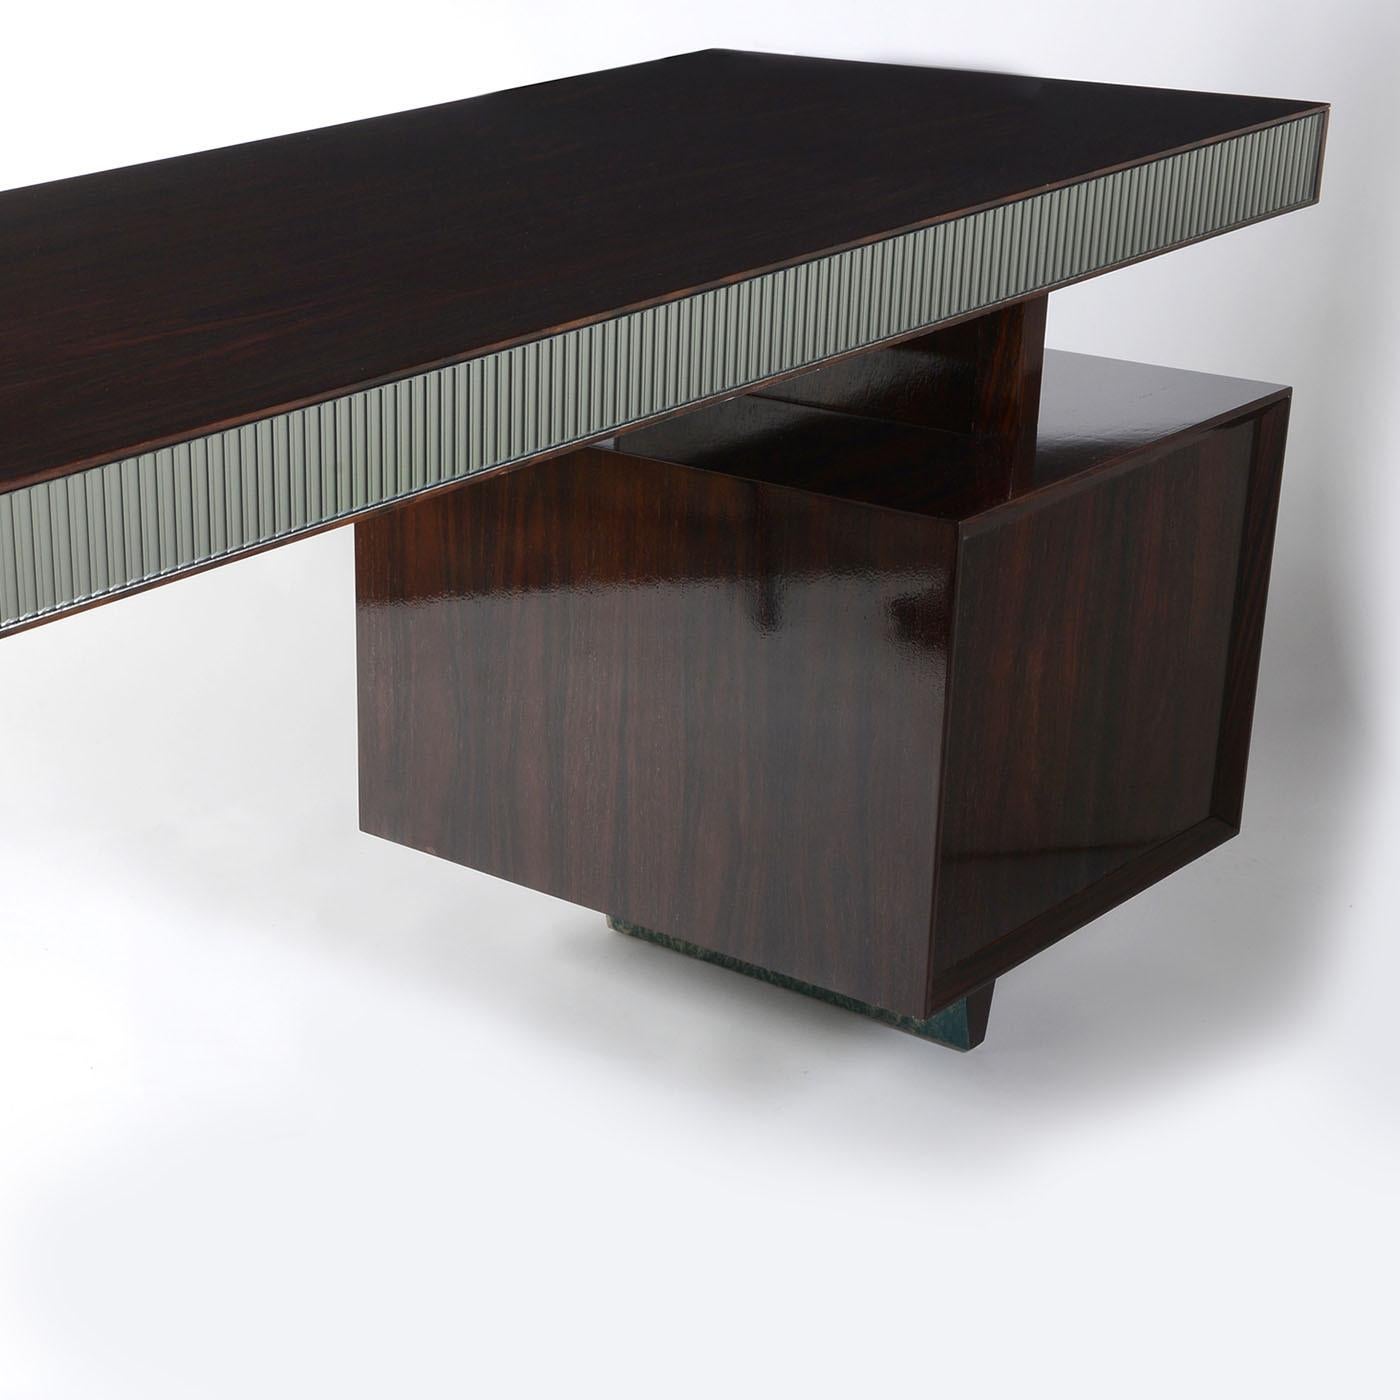 Plush detailing meets a bold and dynamic structure in this superb desk. Offered in a stylish glossy finish, the lovely India rosewood veneer couples with luminous profiles covered in textured smoky mirrored glass that seal its luxurious and